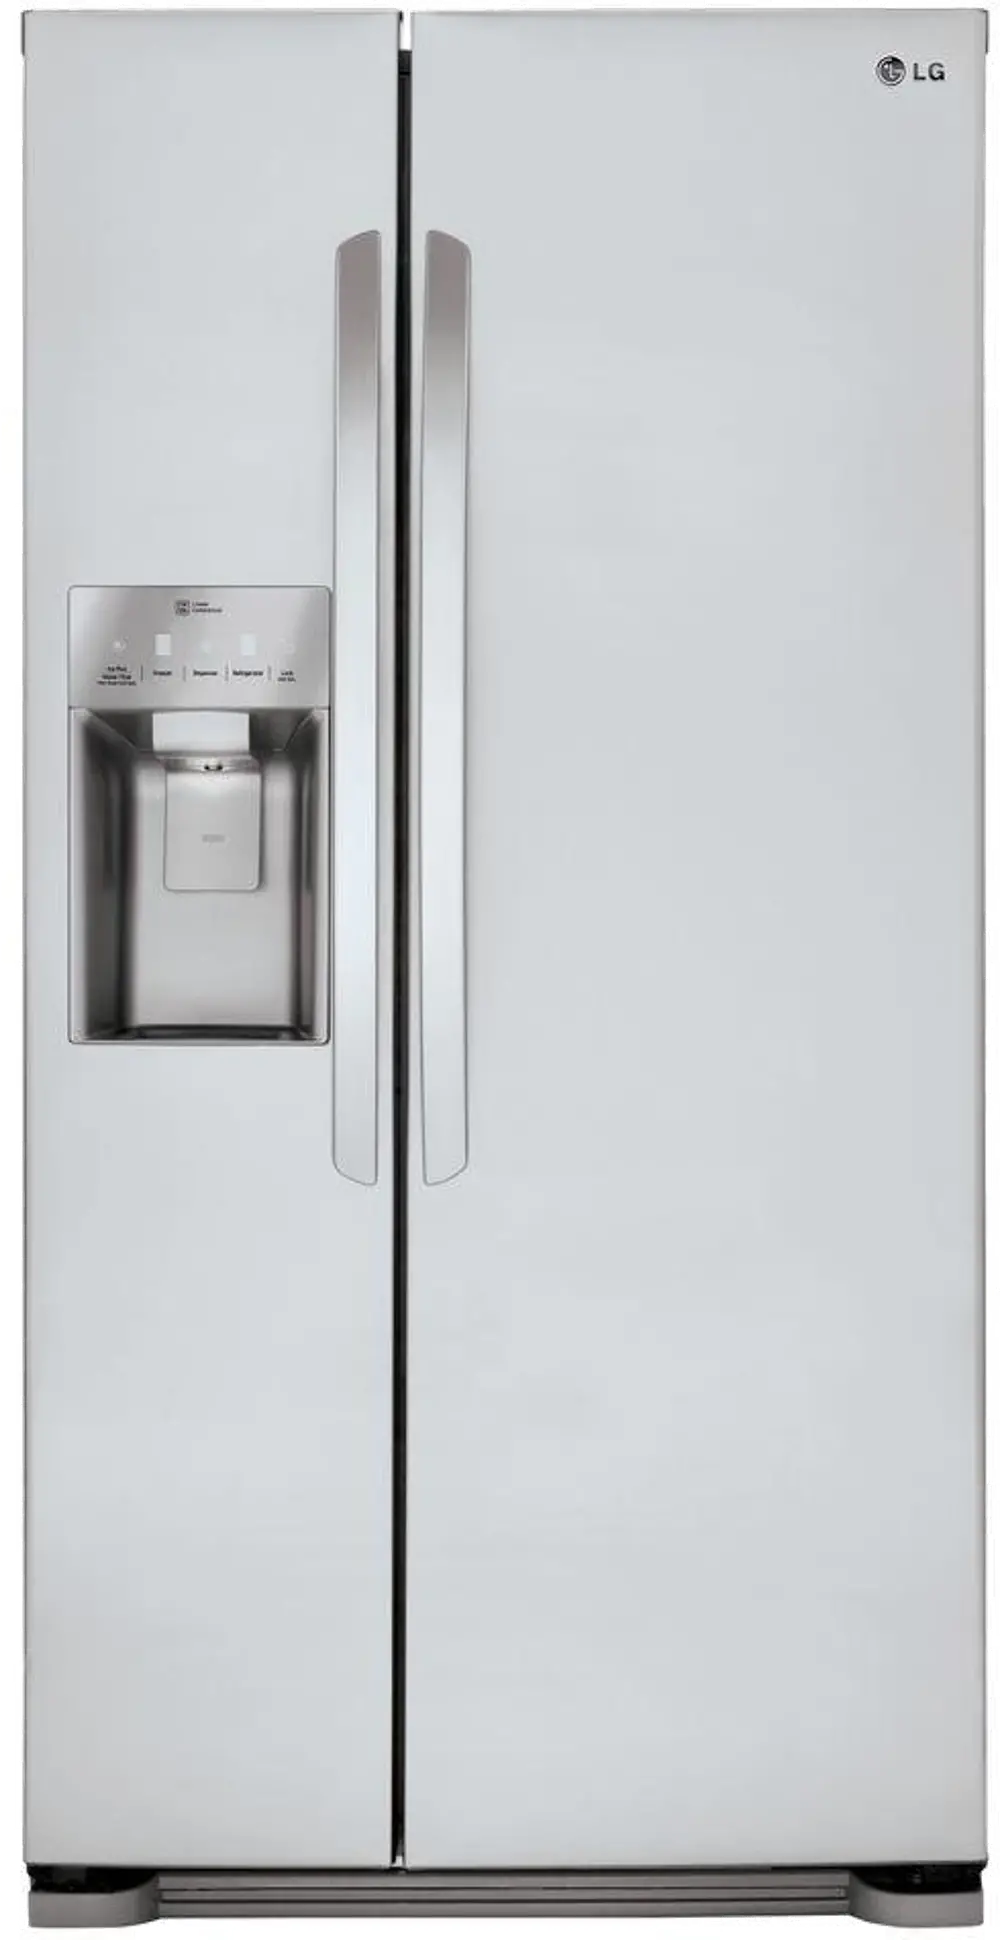 LSXS22423S LG 21.86 cu. ft. Side by Side Refrigerator - 33 Inch Stainless Steel-1